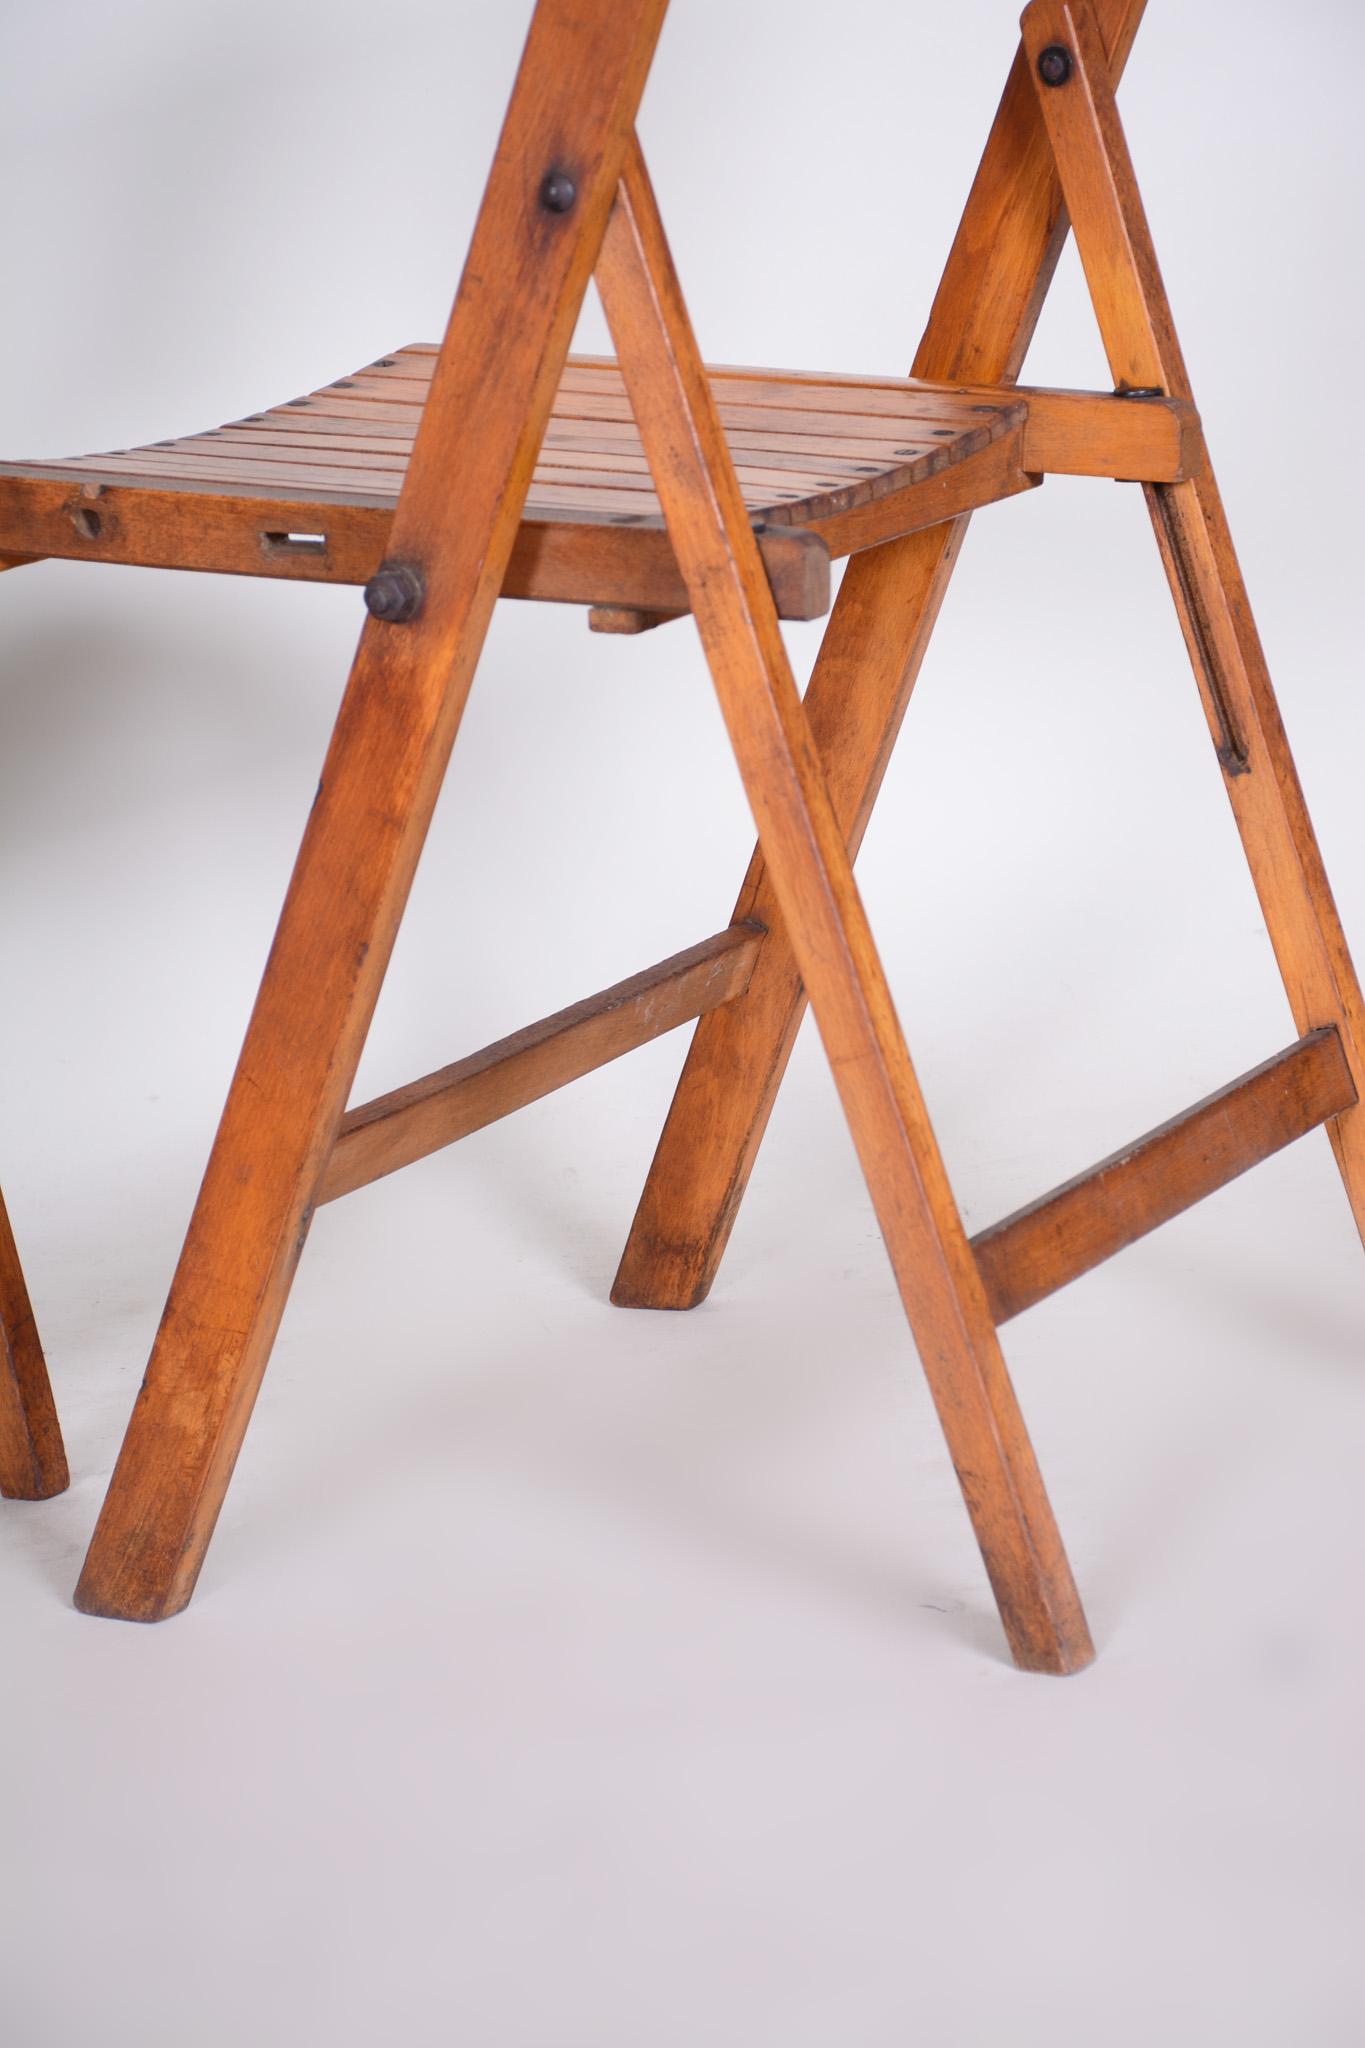 Wood Czech Midcentury Beech Chairs, Original Condition, 1950s, 2 Pieces For Sale